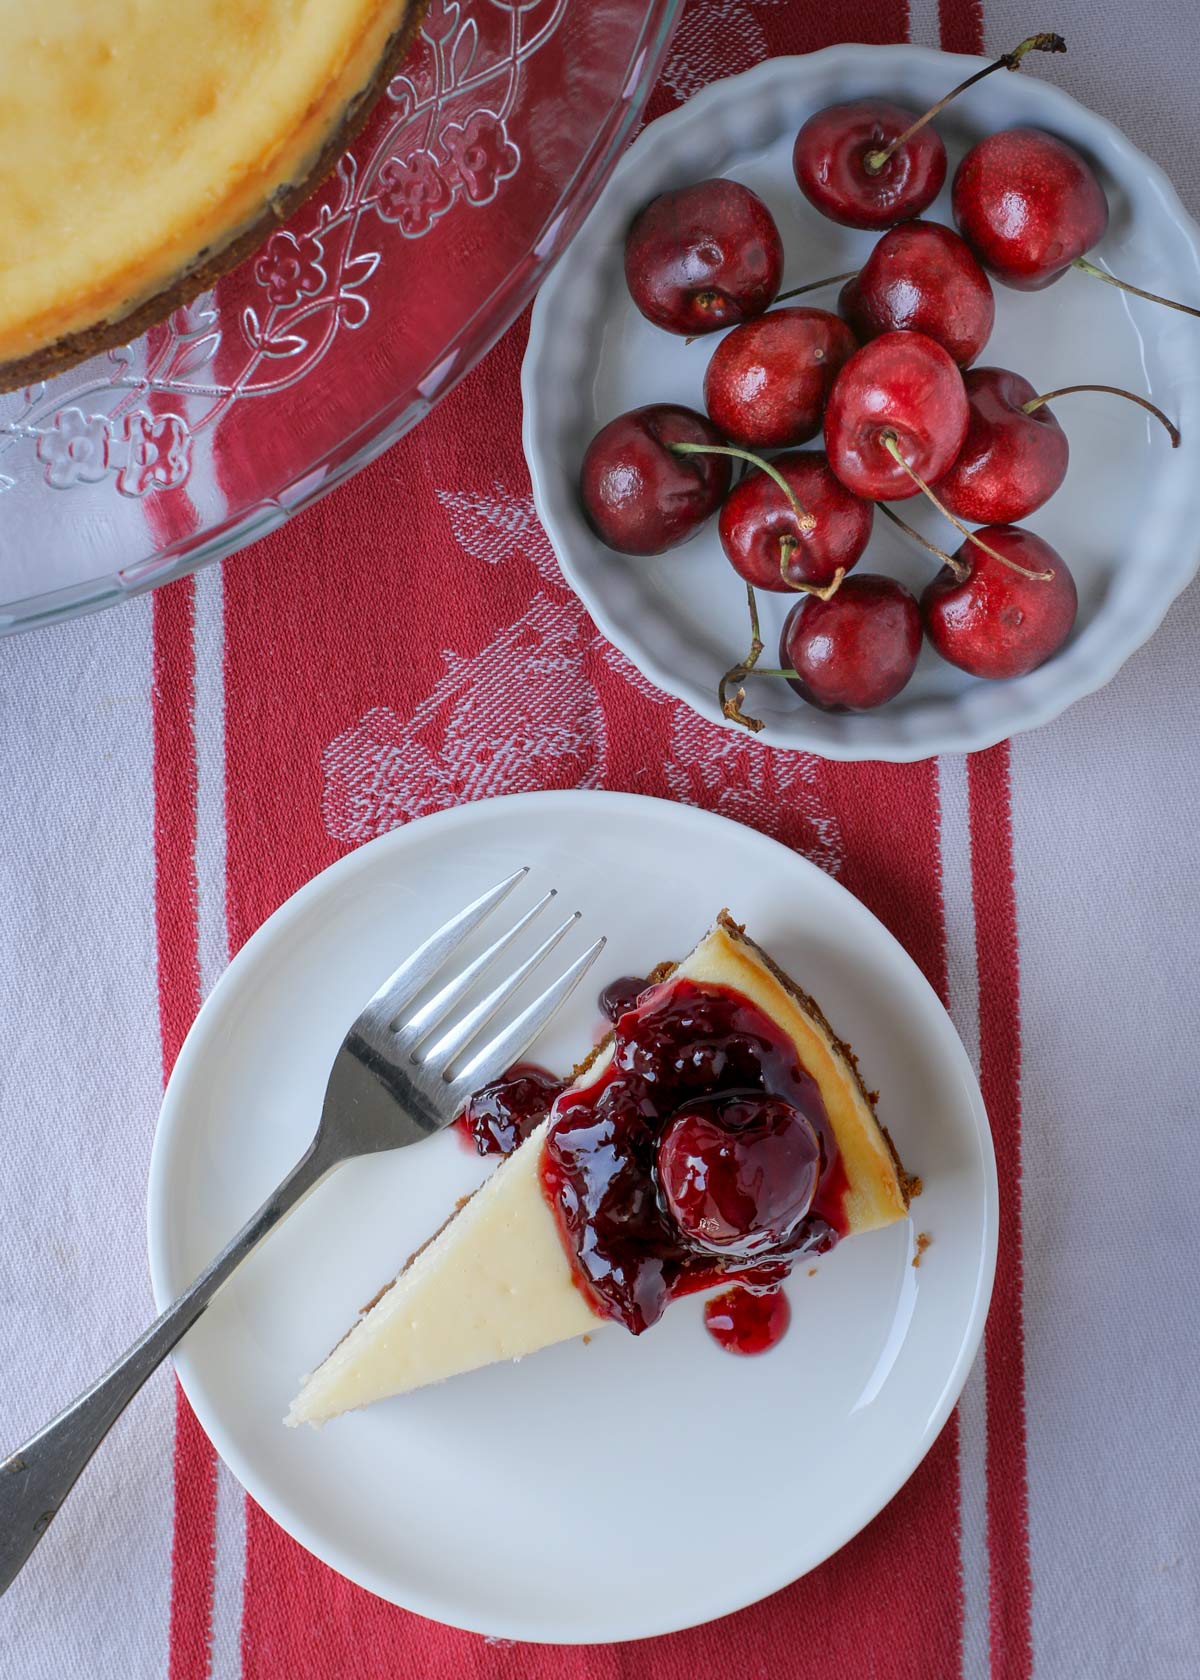 overhead shot of cheesecake on plate with cherries in a dish nearby.